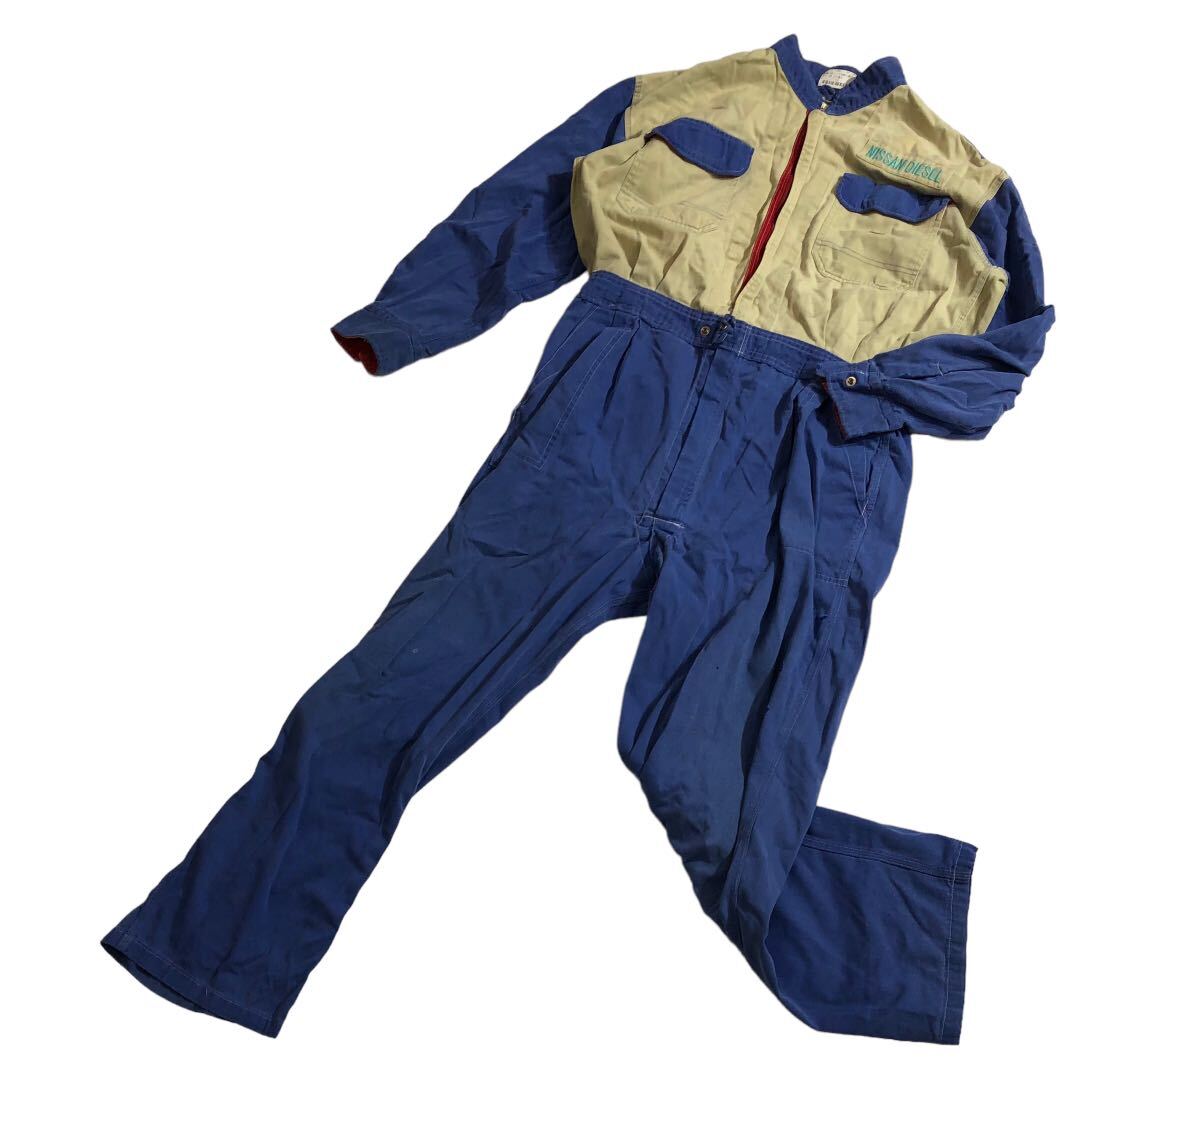  large size # Nissan NISSAN Nissan # Logo embroidery print mechanism nik suit coverall coveralls all-in-one blue × beige 5L